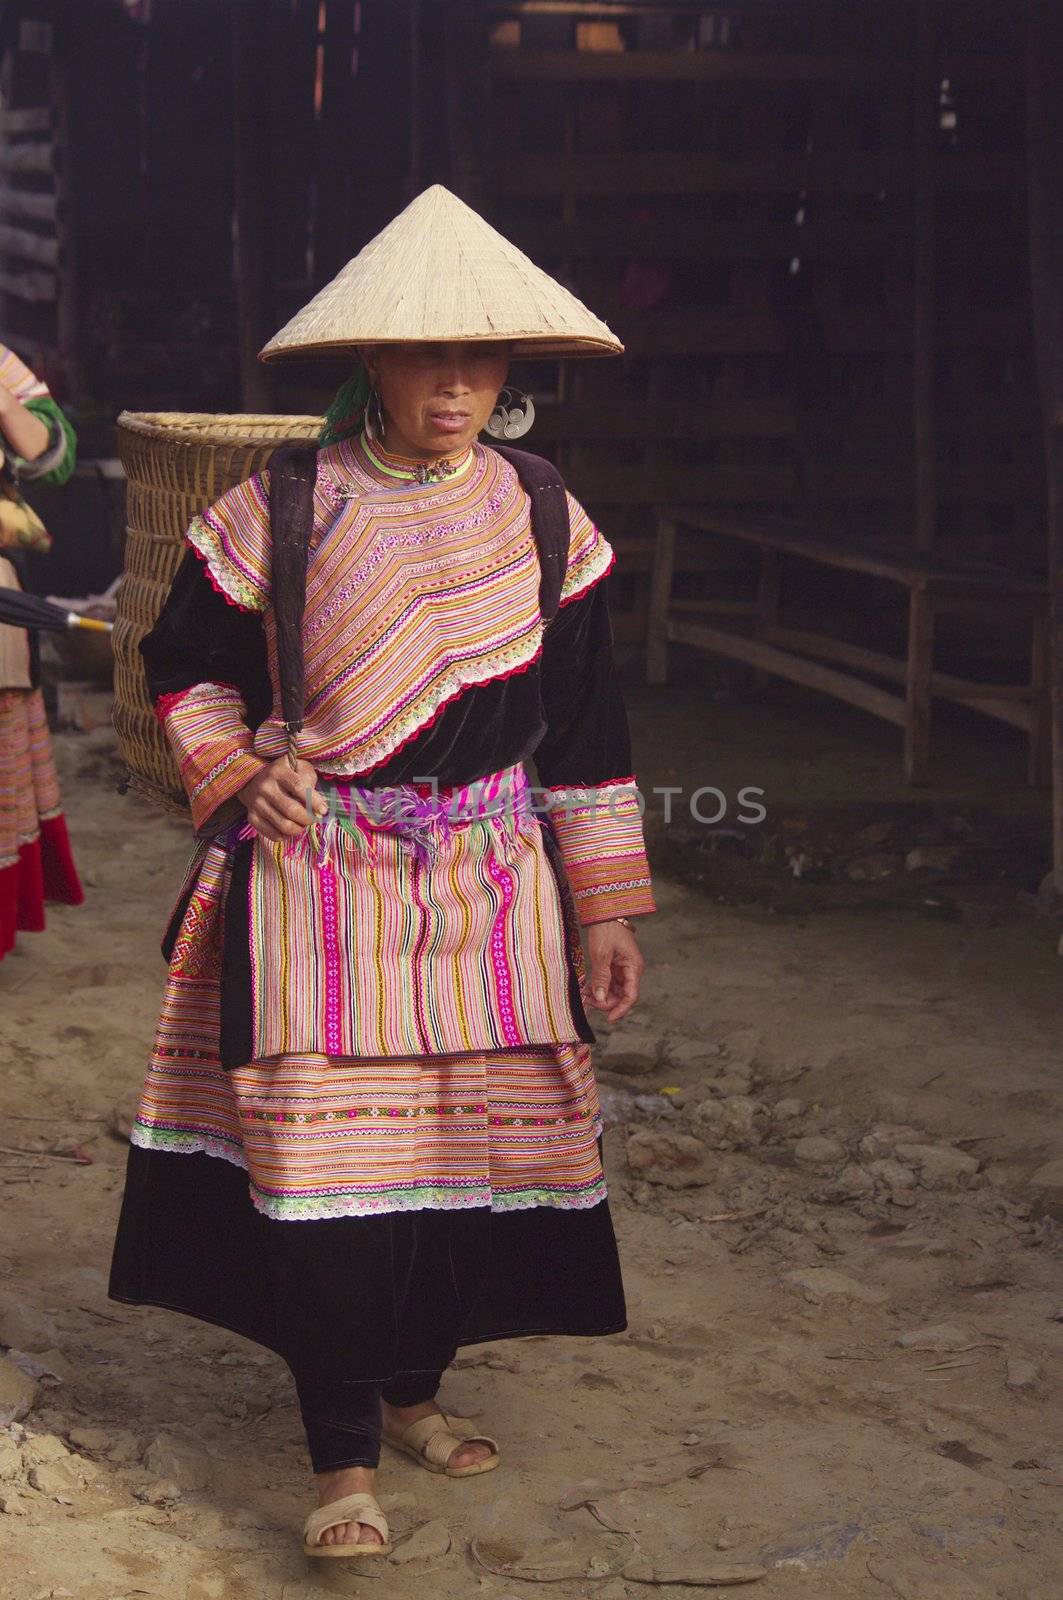 Hmong flowered woman in market of Can Cau by Duroc